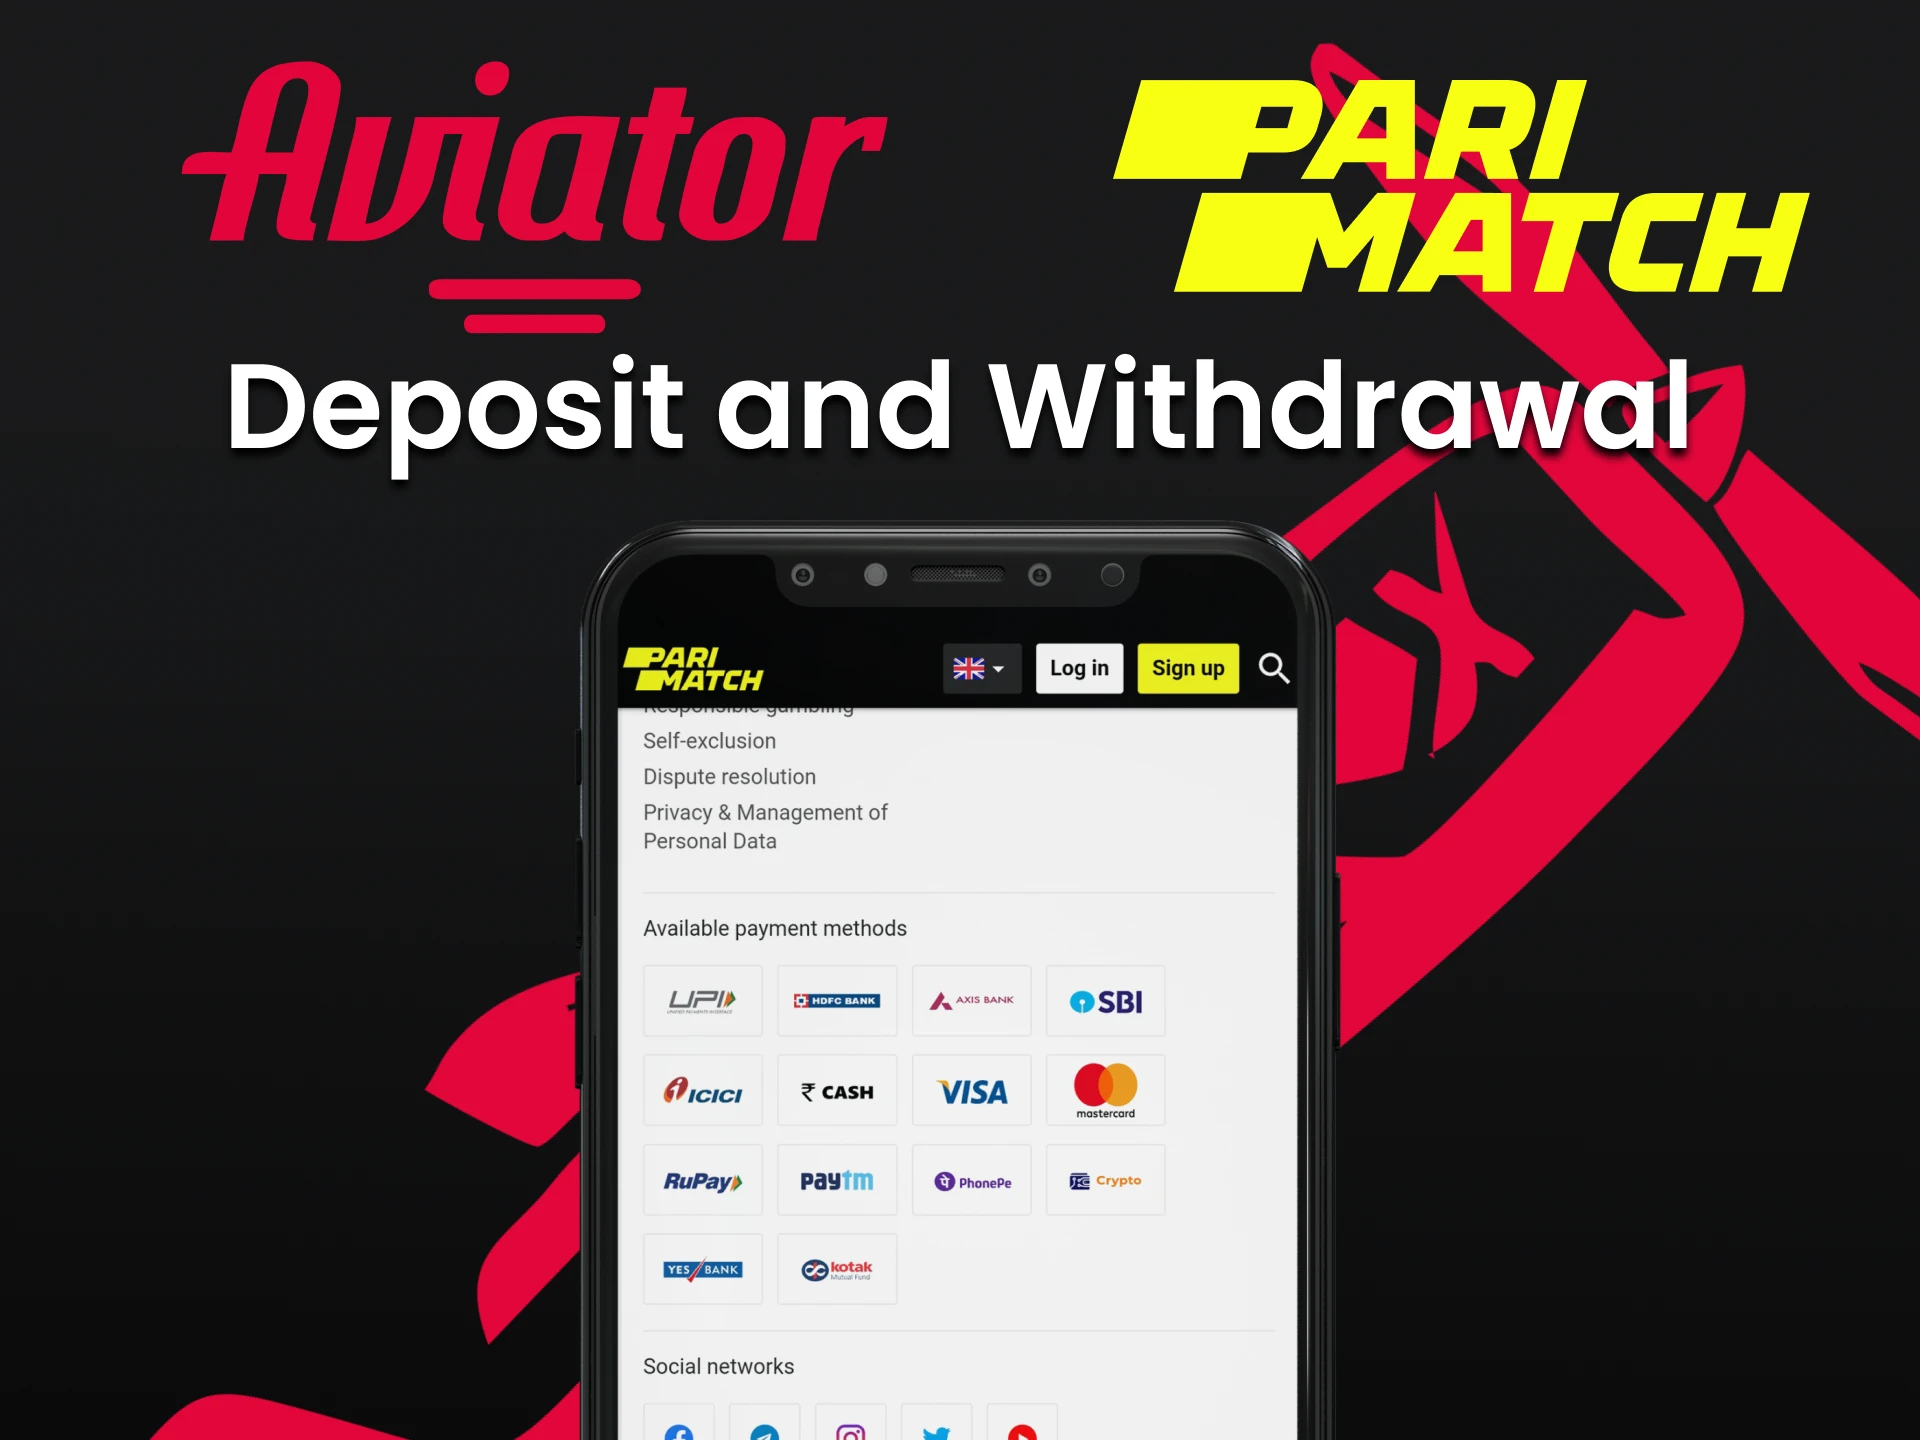 Deposit and withdraw funds to play Aviator at Parimatch.